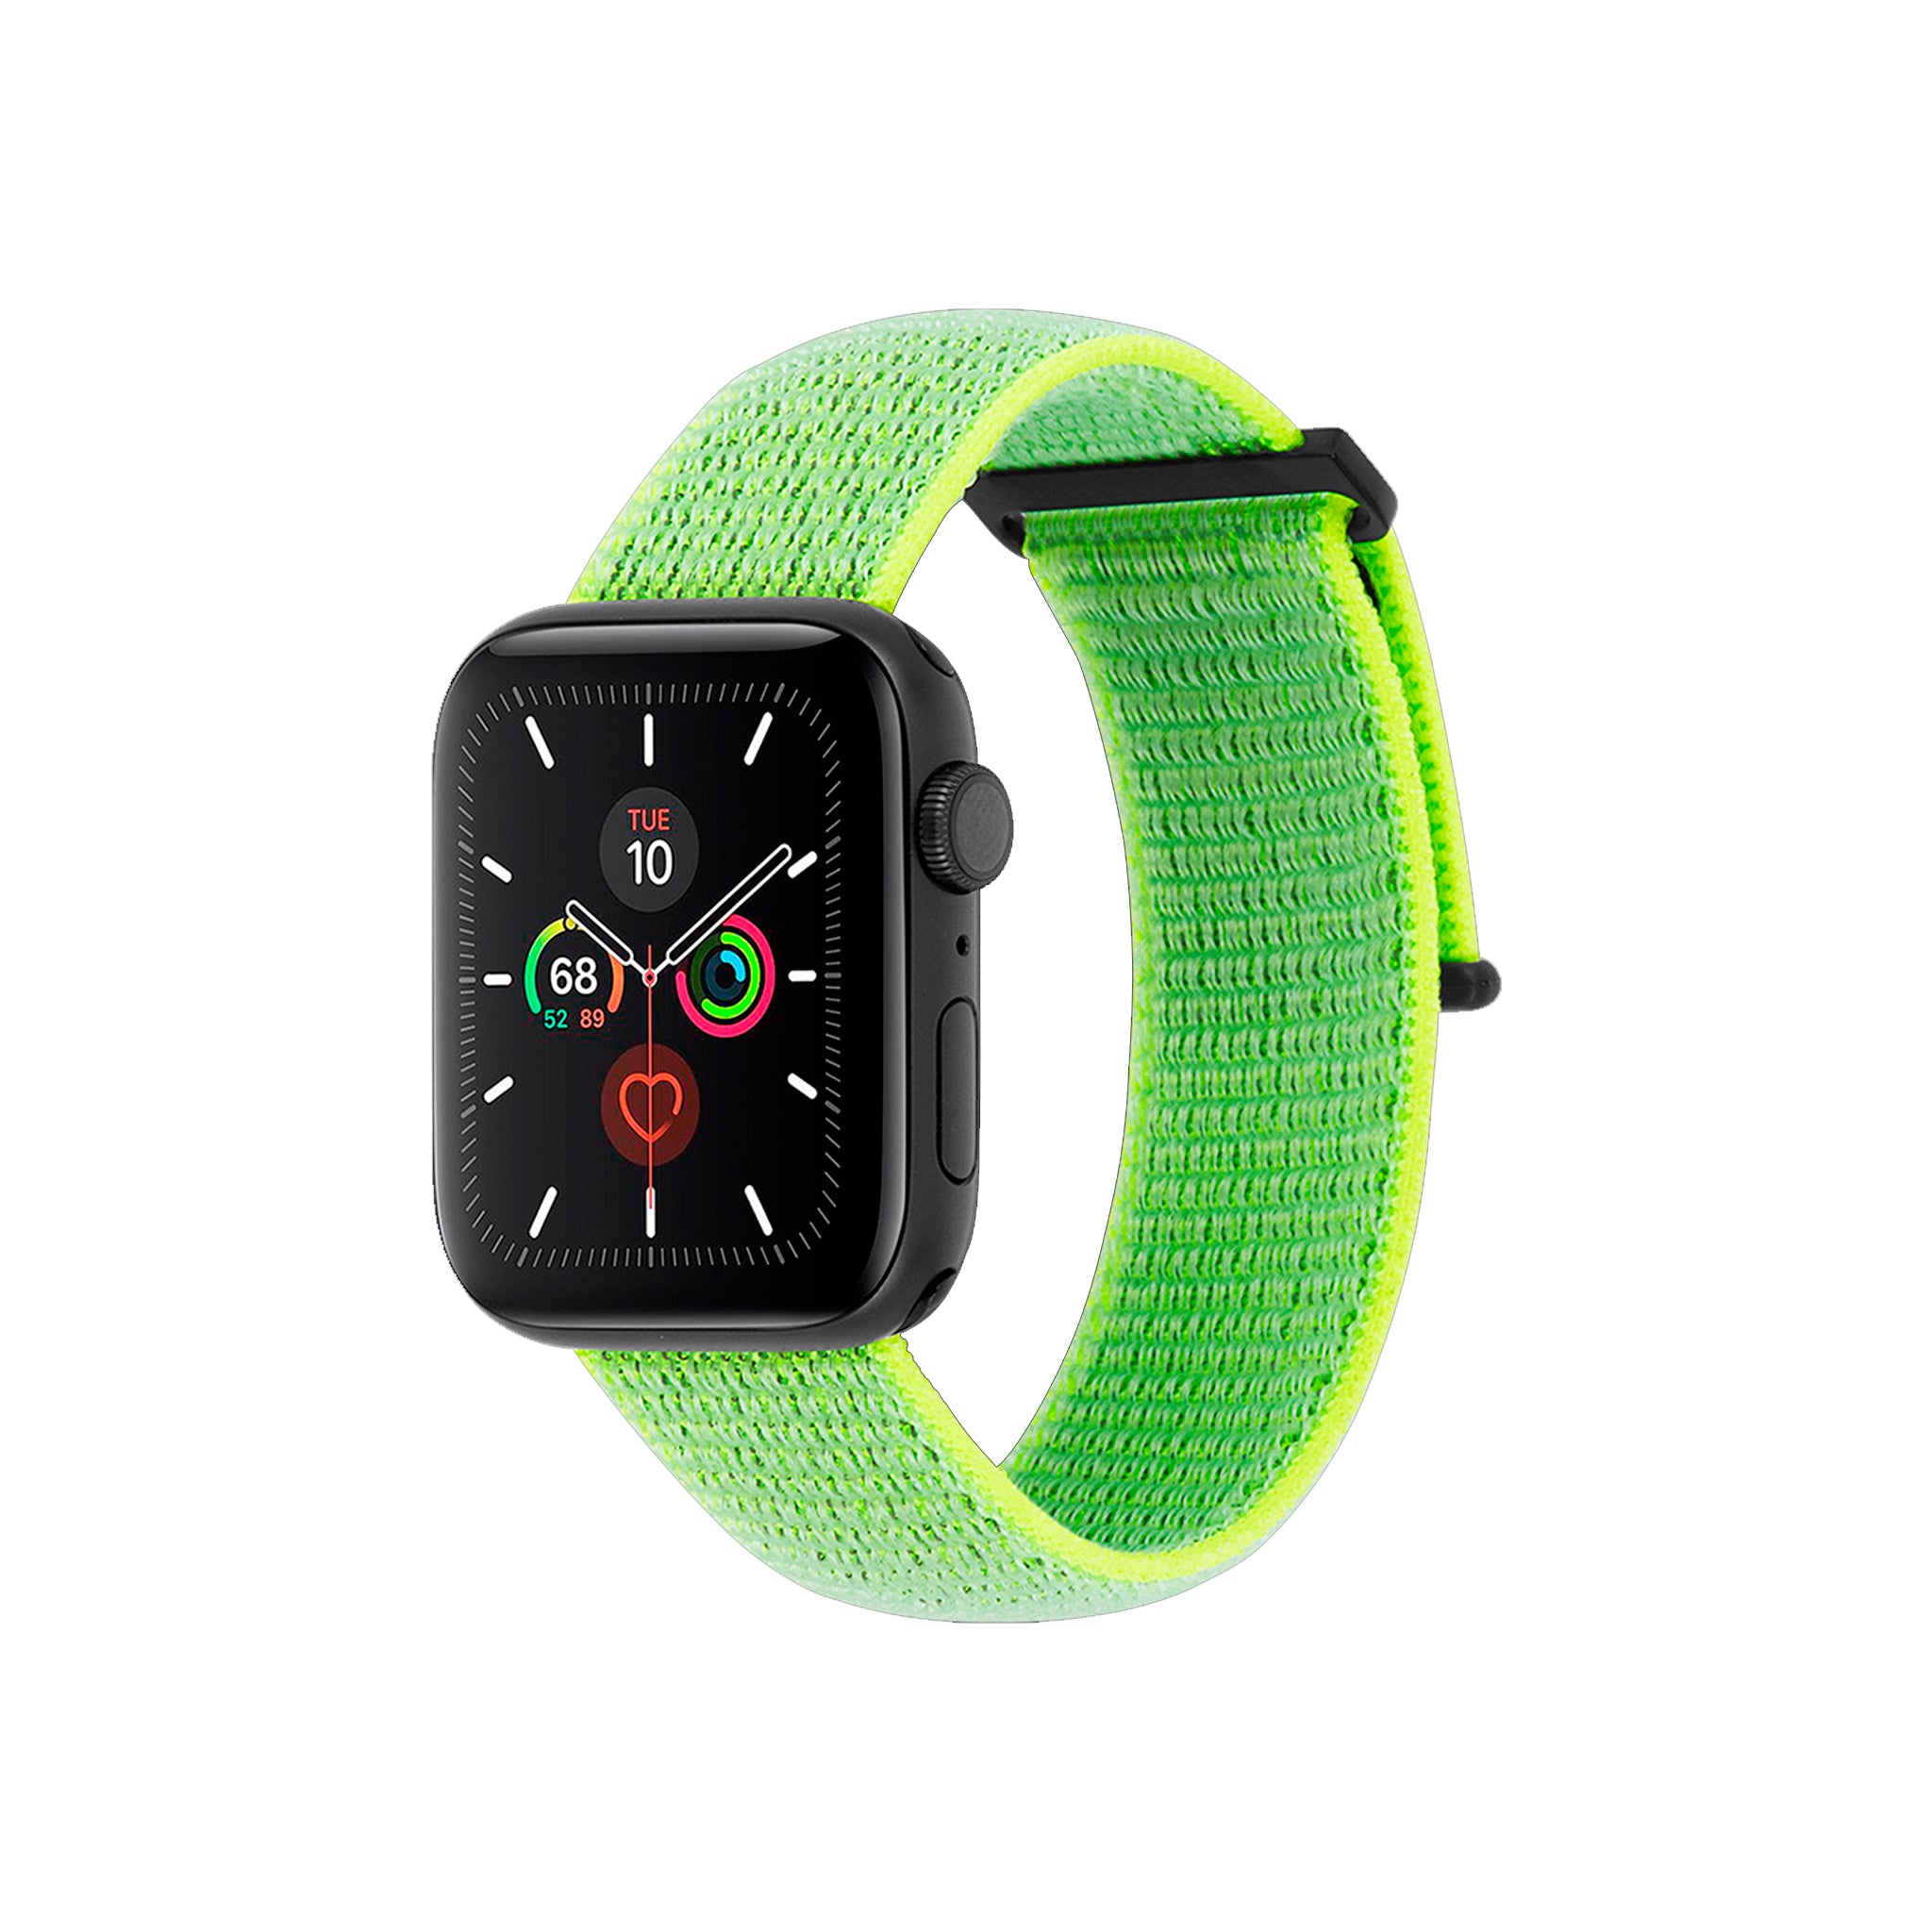 Case-mate - Nylon Watchband For Apple Watch 38mm / 40mm - Reflective Neon Green